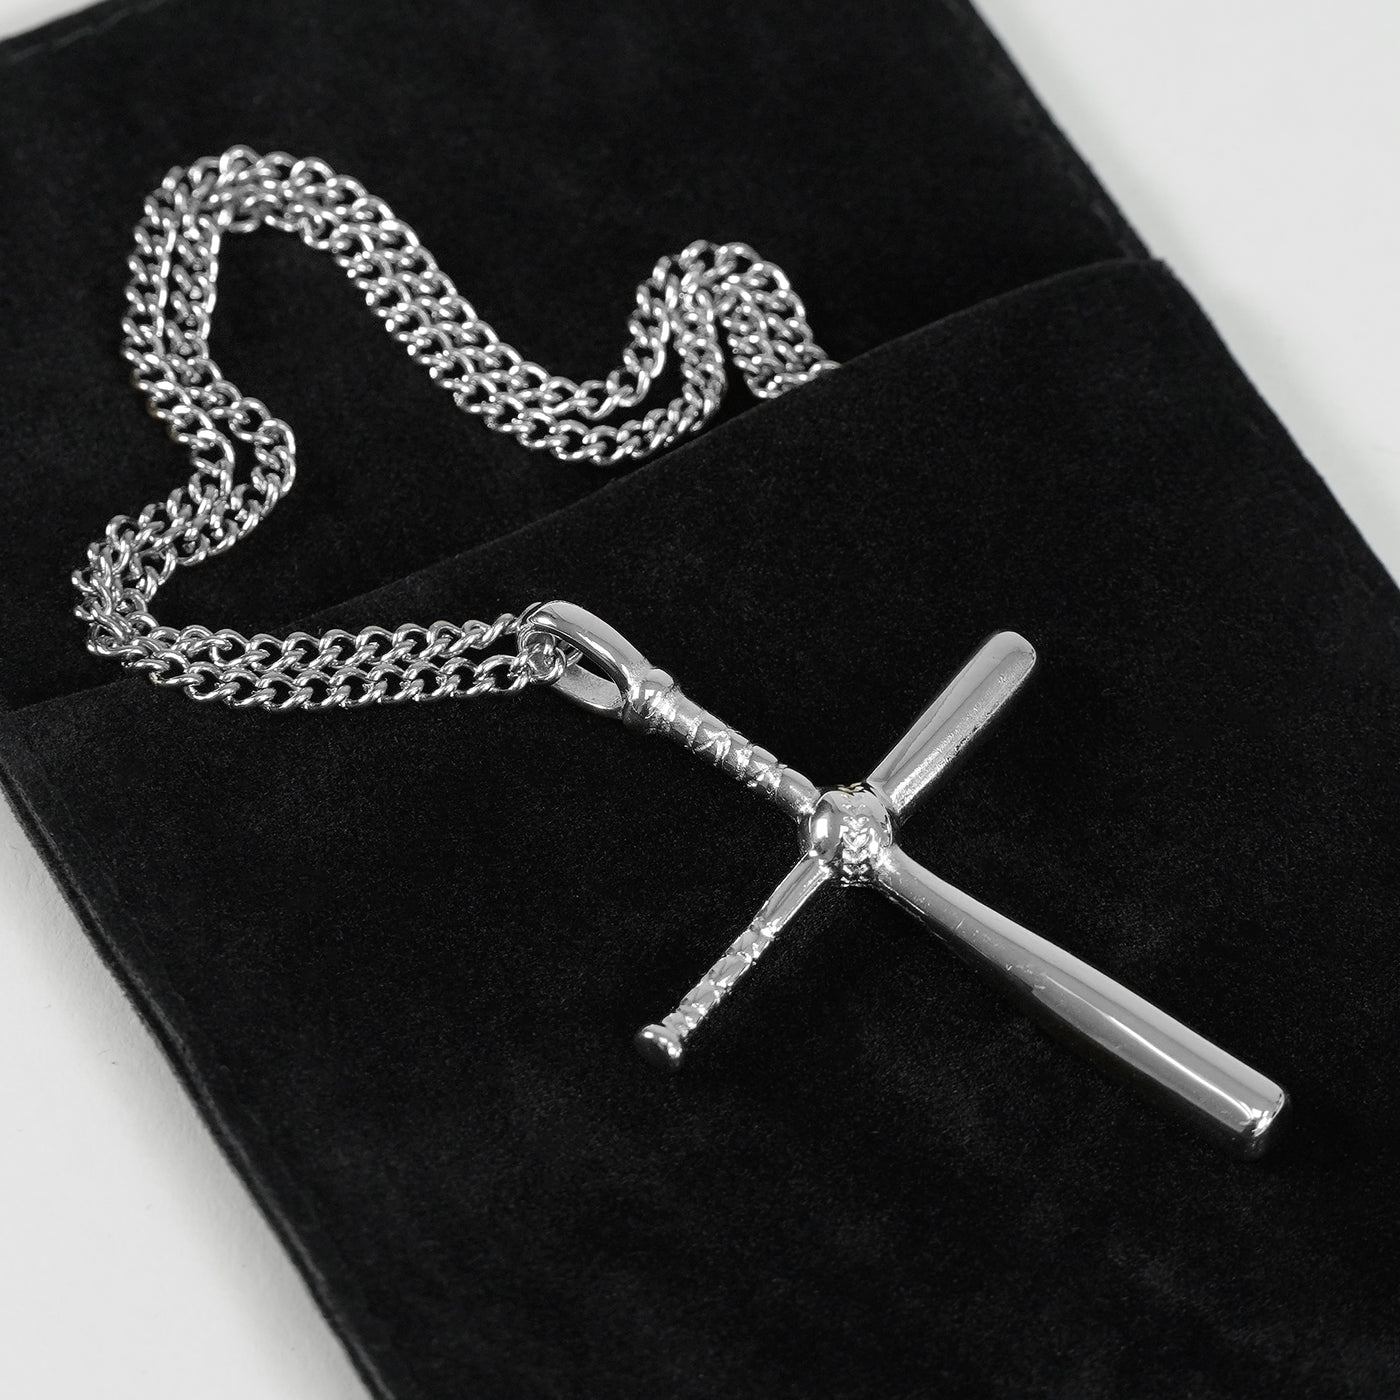 Baseball Bat Cross Pendant with Chain Necklace - Stainless Steel